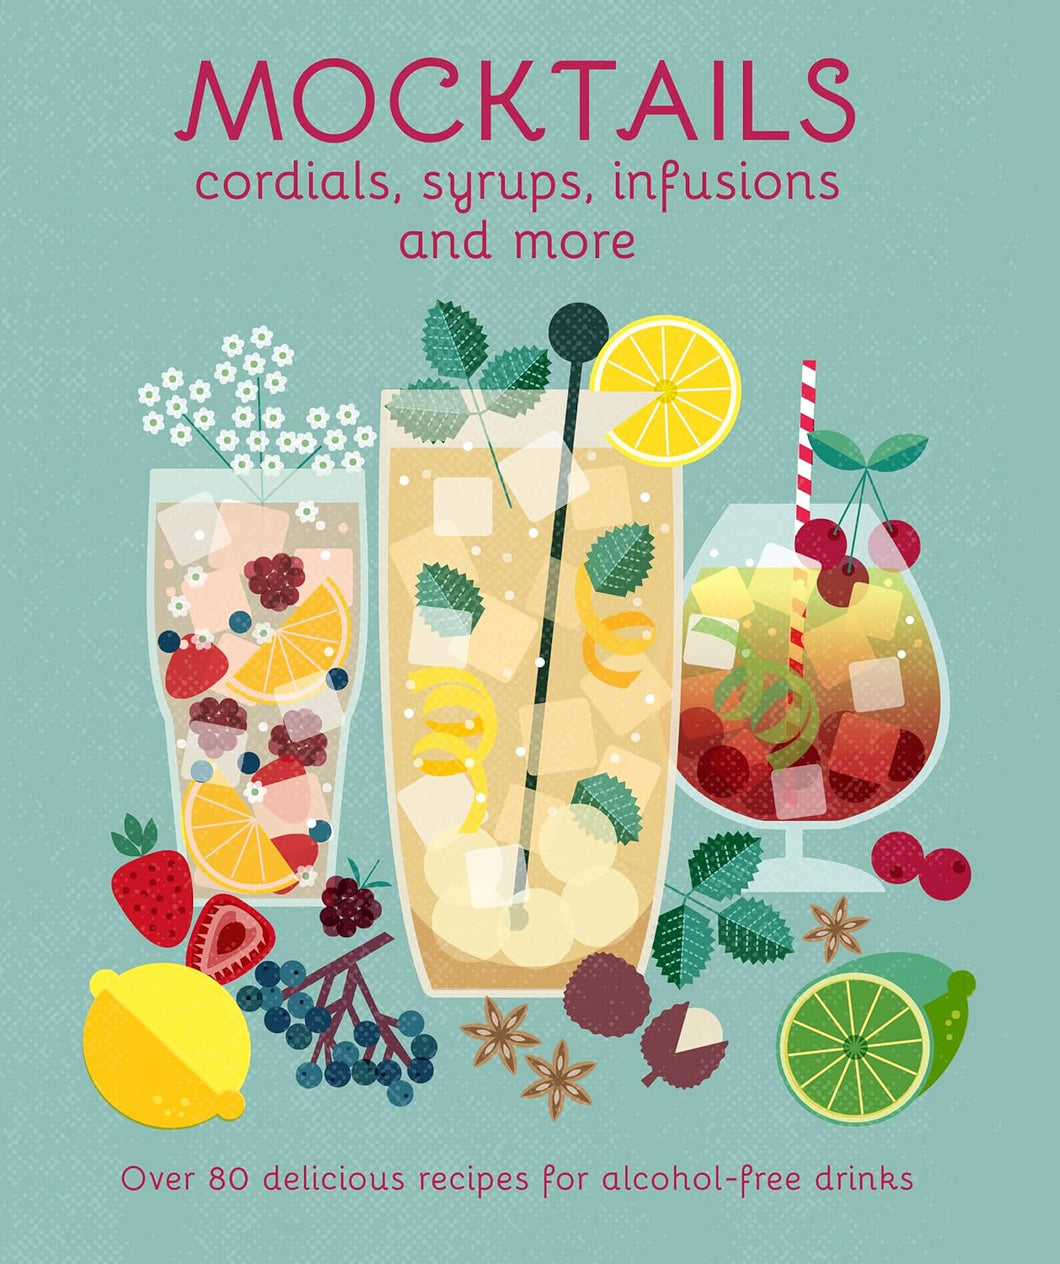 Mocktails - Cordials, Syrups, Infusions & More